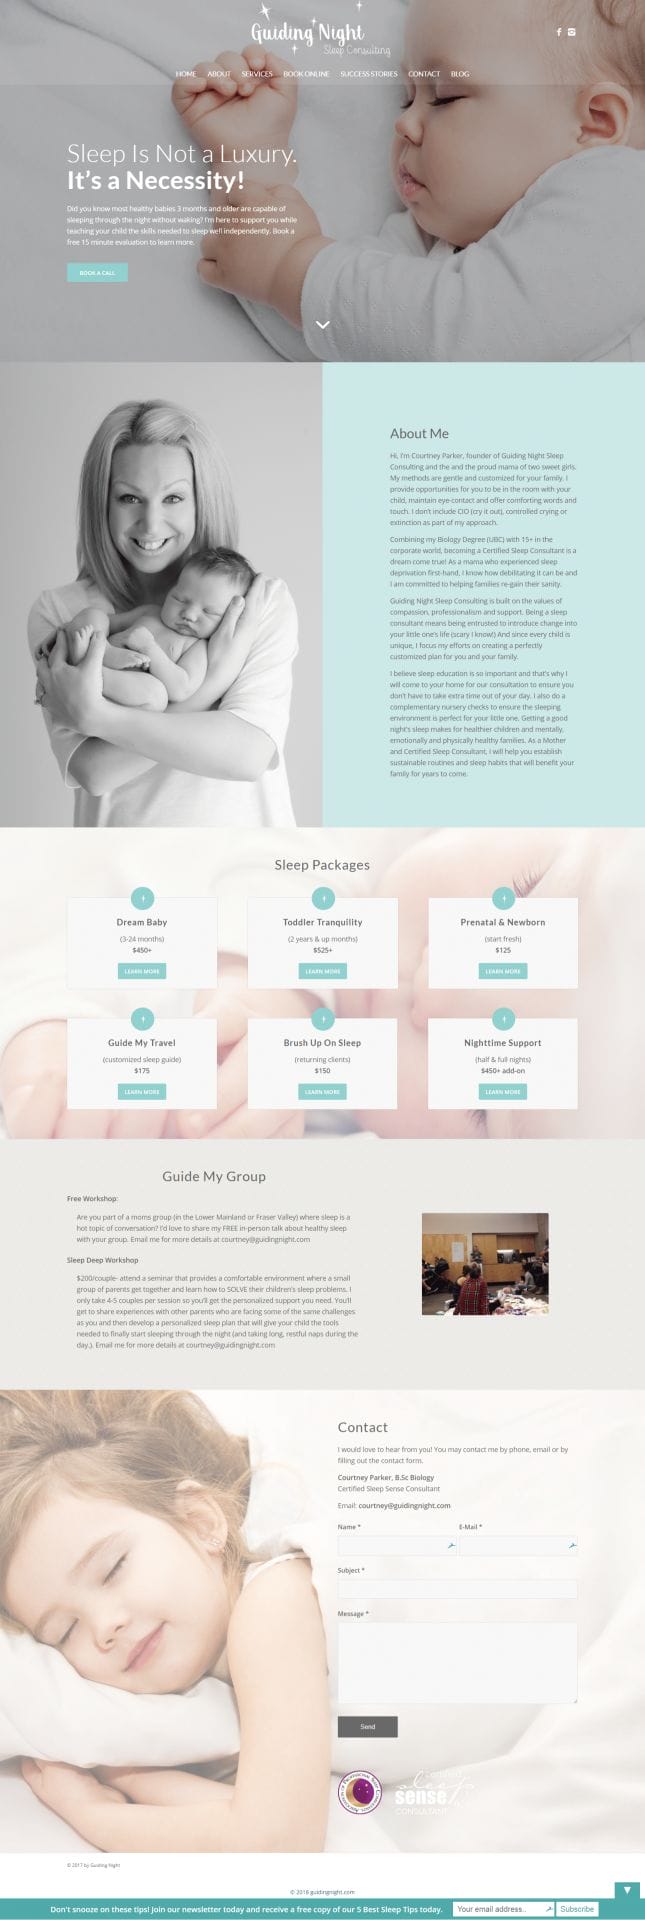 Guiding Night Web Design home page layout